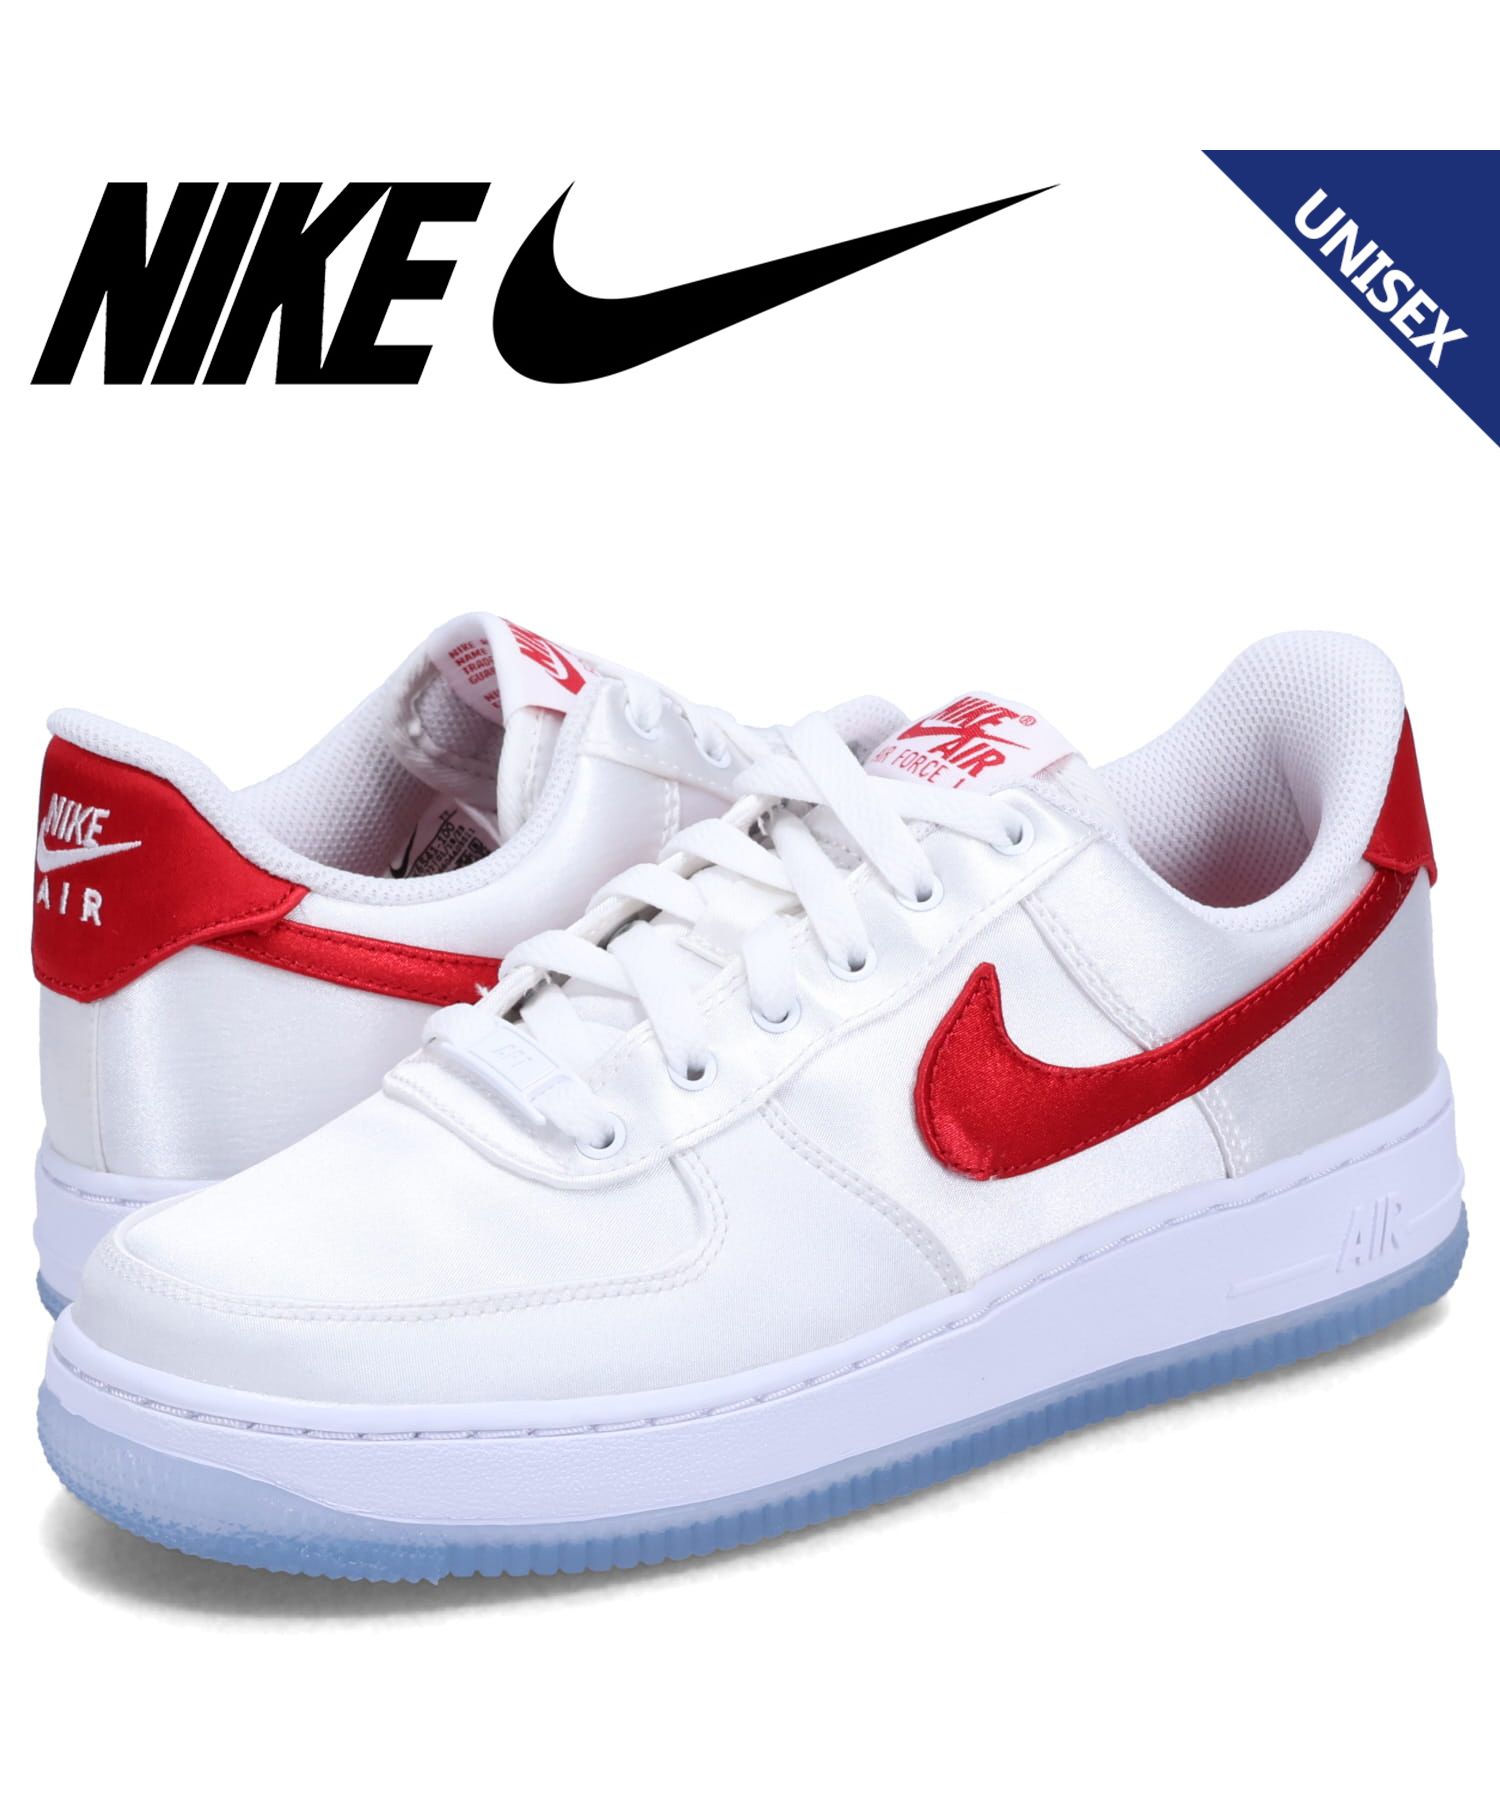 NIKE WMNS AIR FORCE 1 07 ESS SNKR ナイキ エア